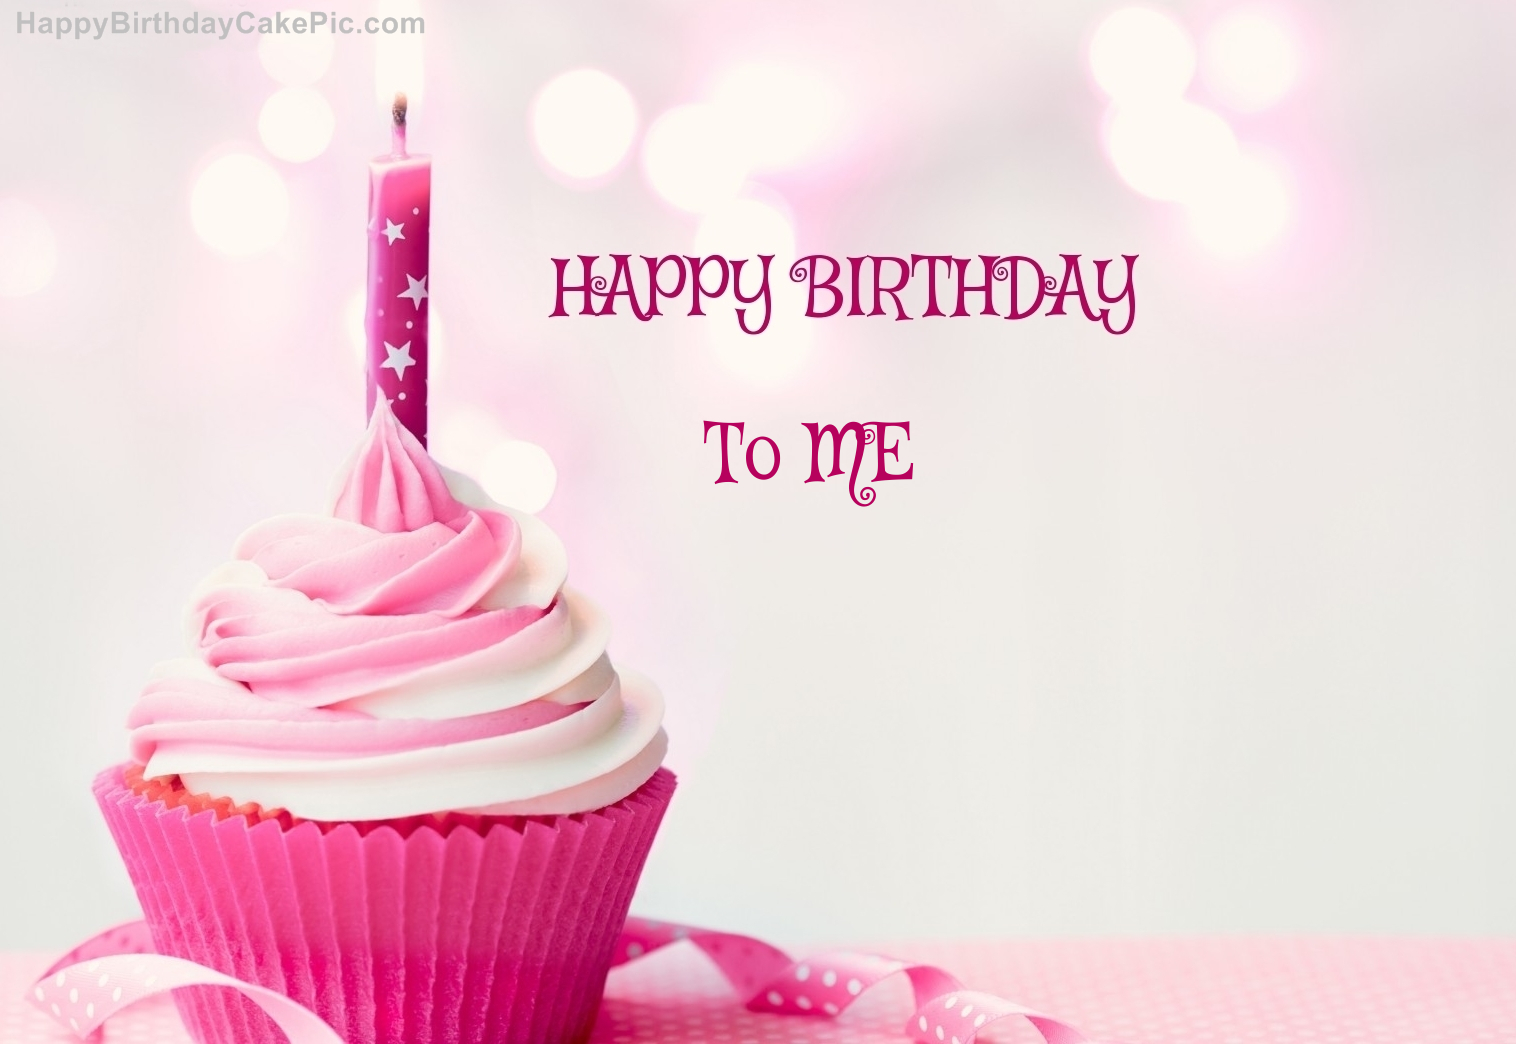 ️ Happy Birthday Cupcake Candle Pink Cake For To ME